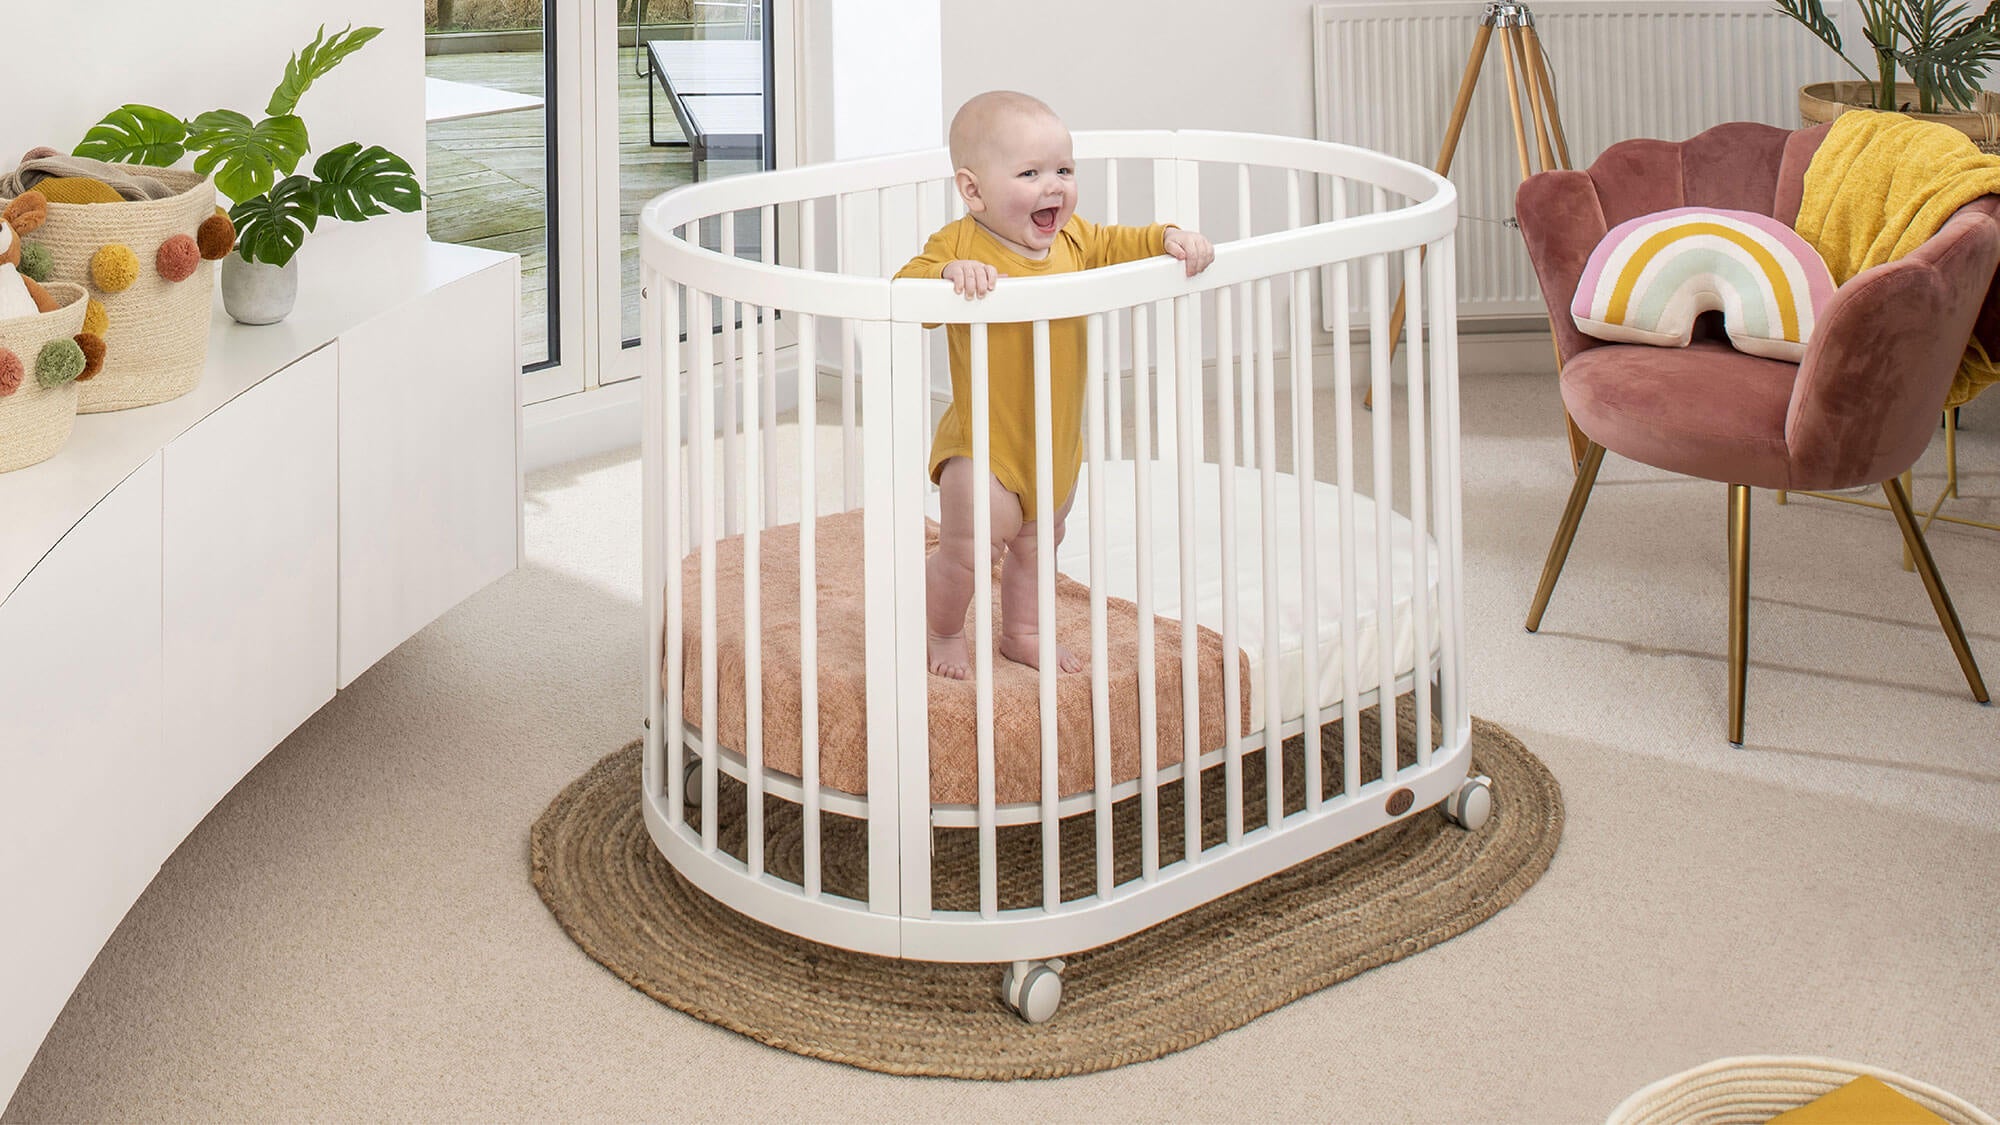 Baby standing and laughing in oval cot